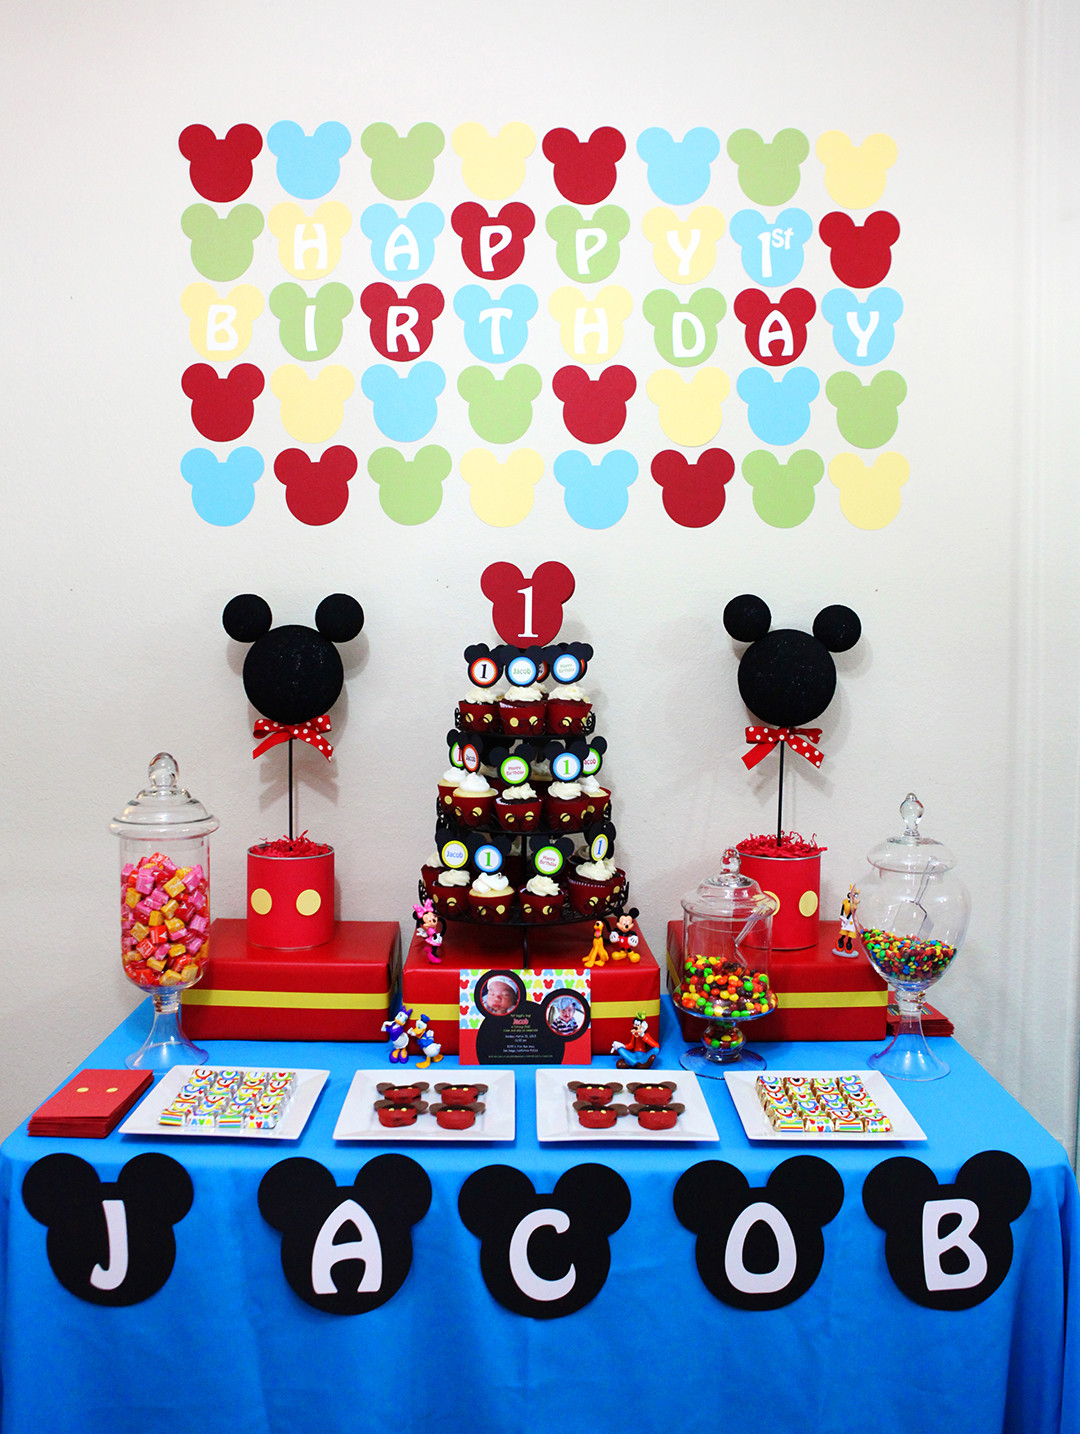 Mickey Mouse Party Ideas For 1St Birthday
 Invitation Parlour Mickey Mouse Birthday Party